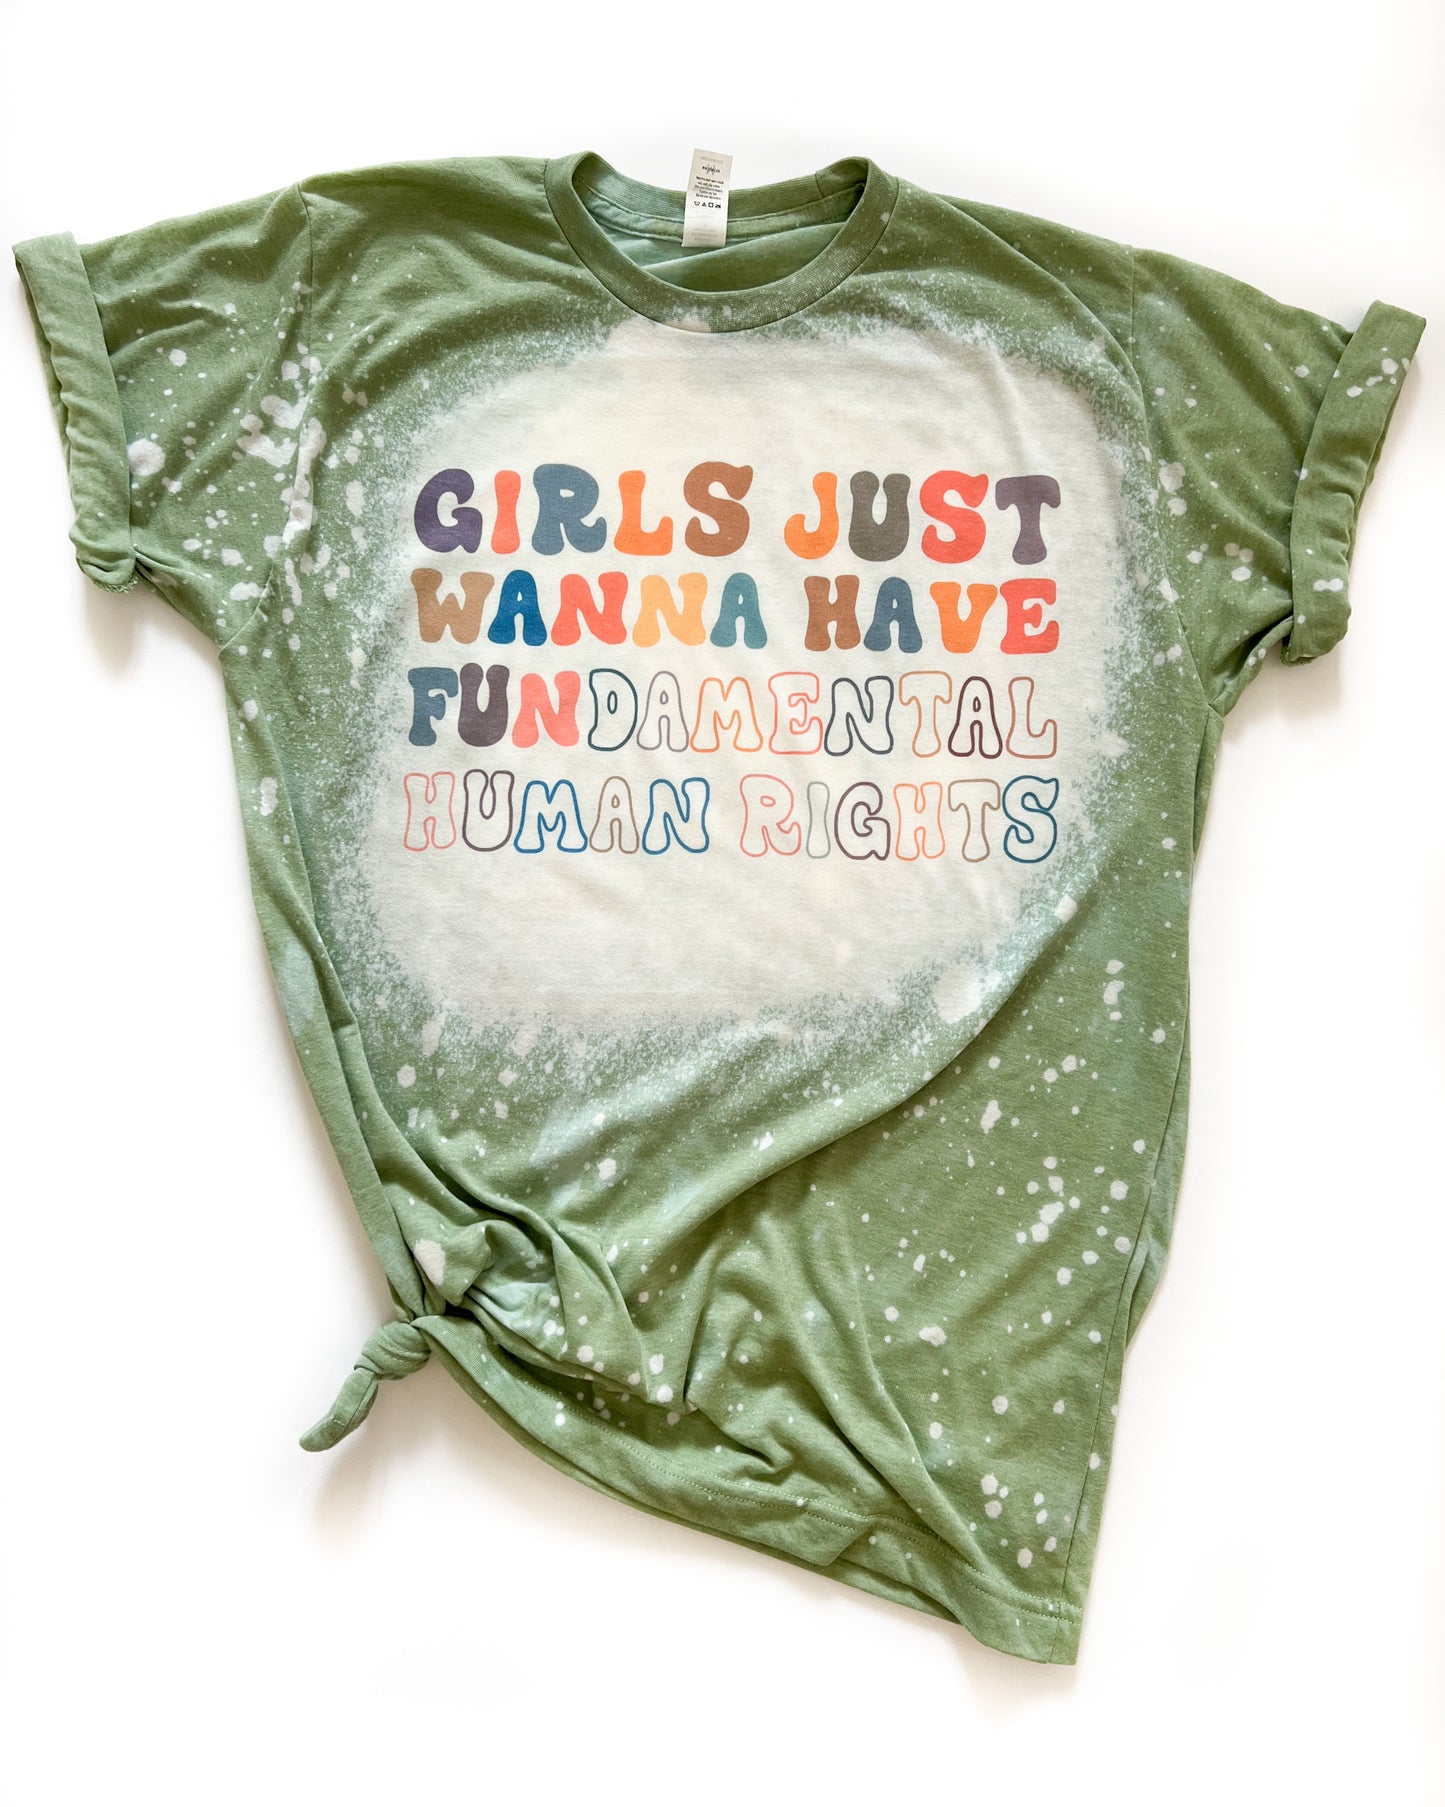 Girls Just Wanna Have Fundamental Rights Bleached Tee